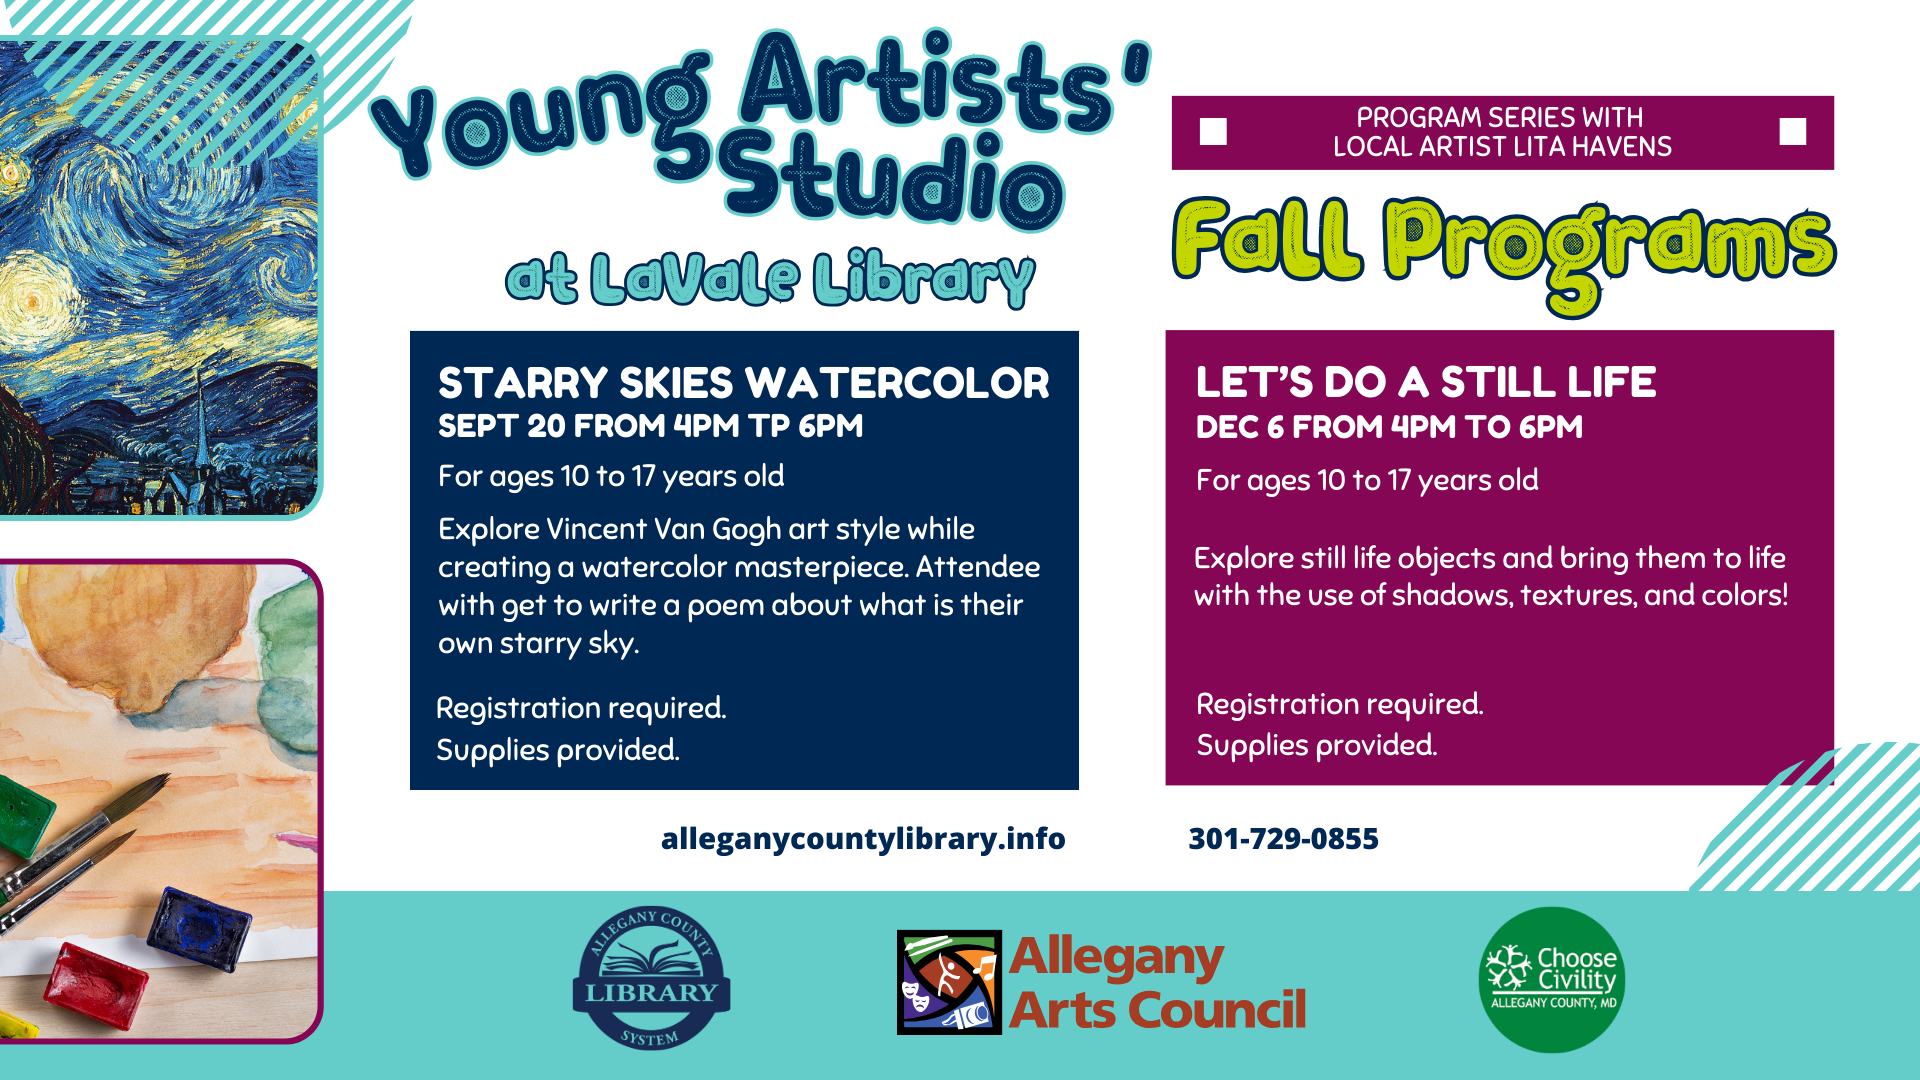 Young Artists' Studio event details